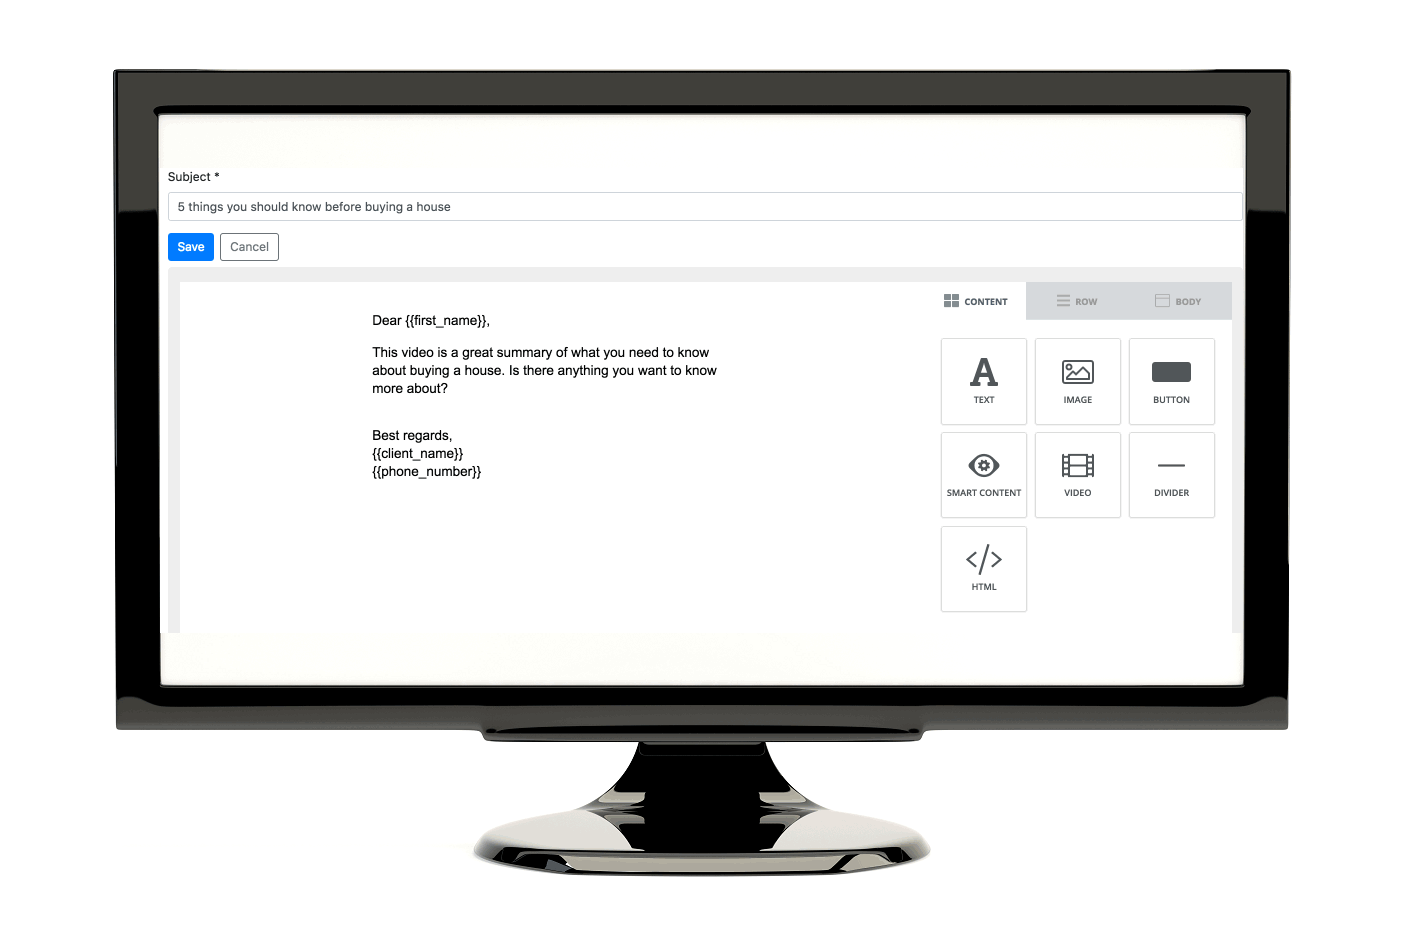 Email Editor Example